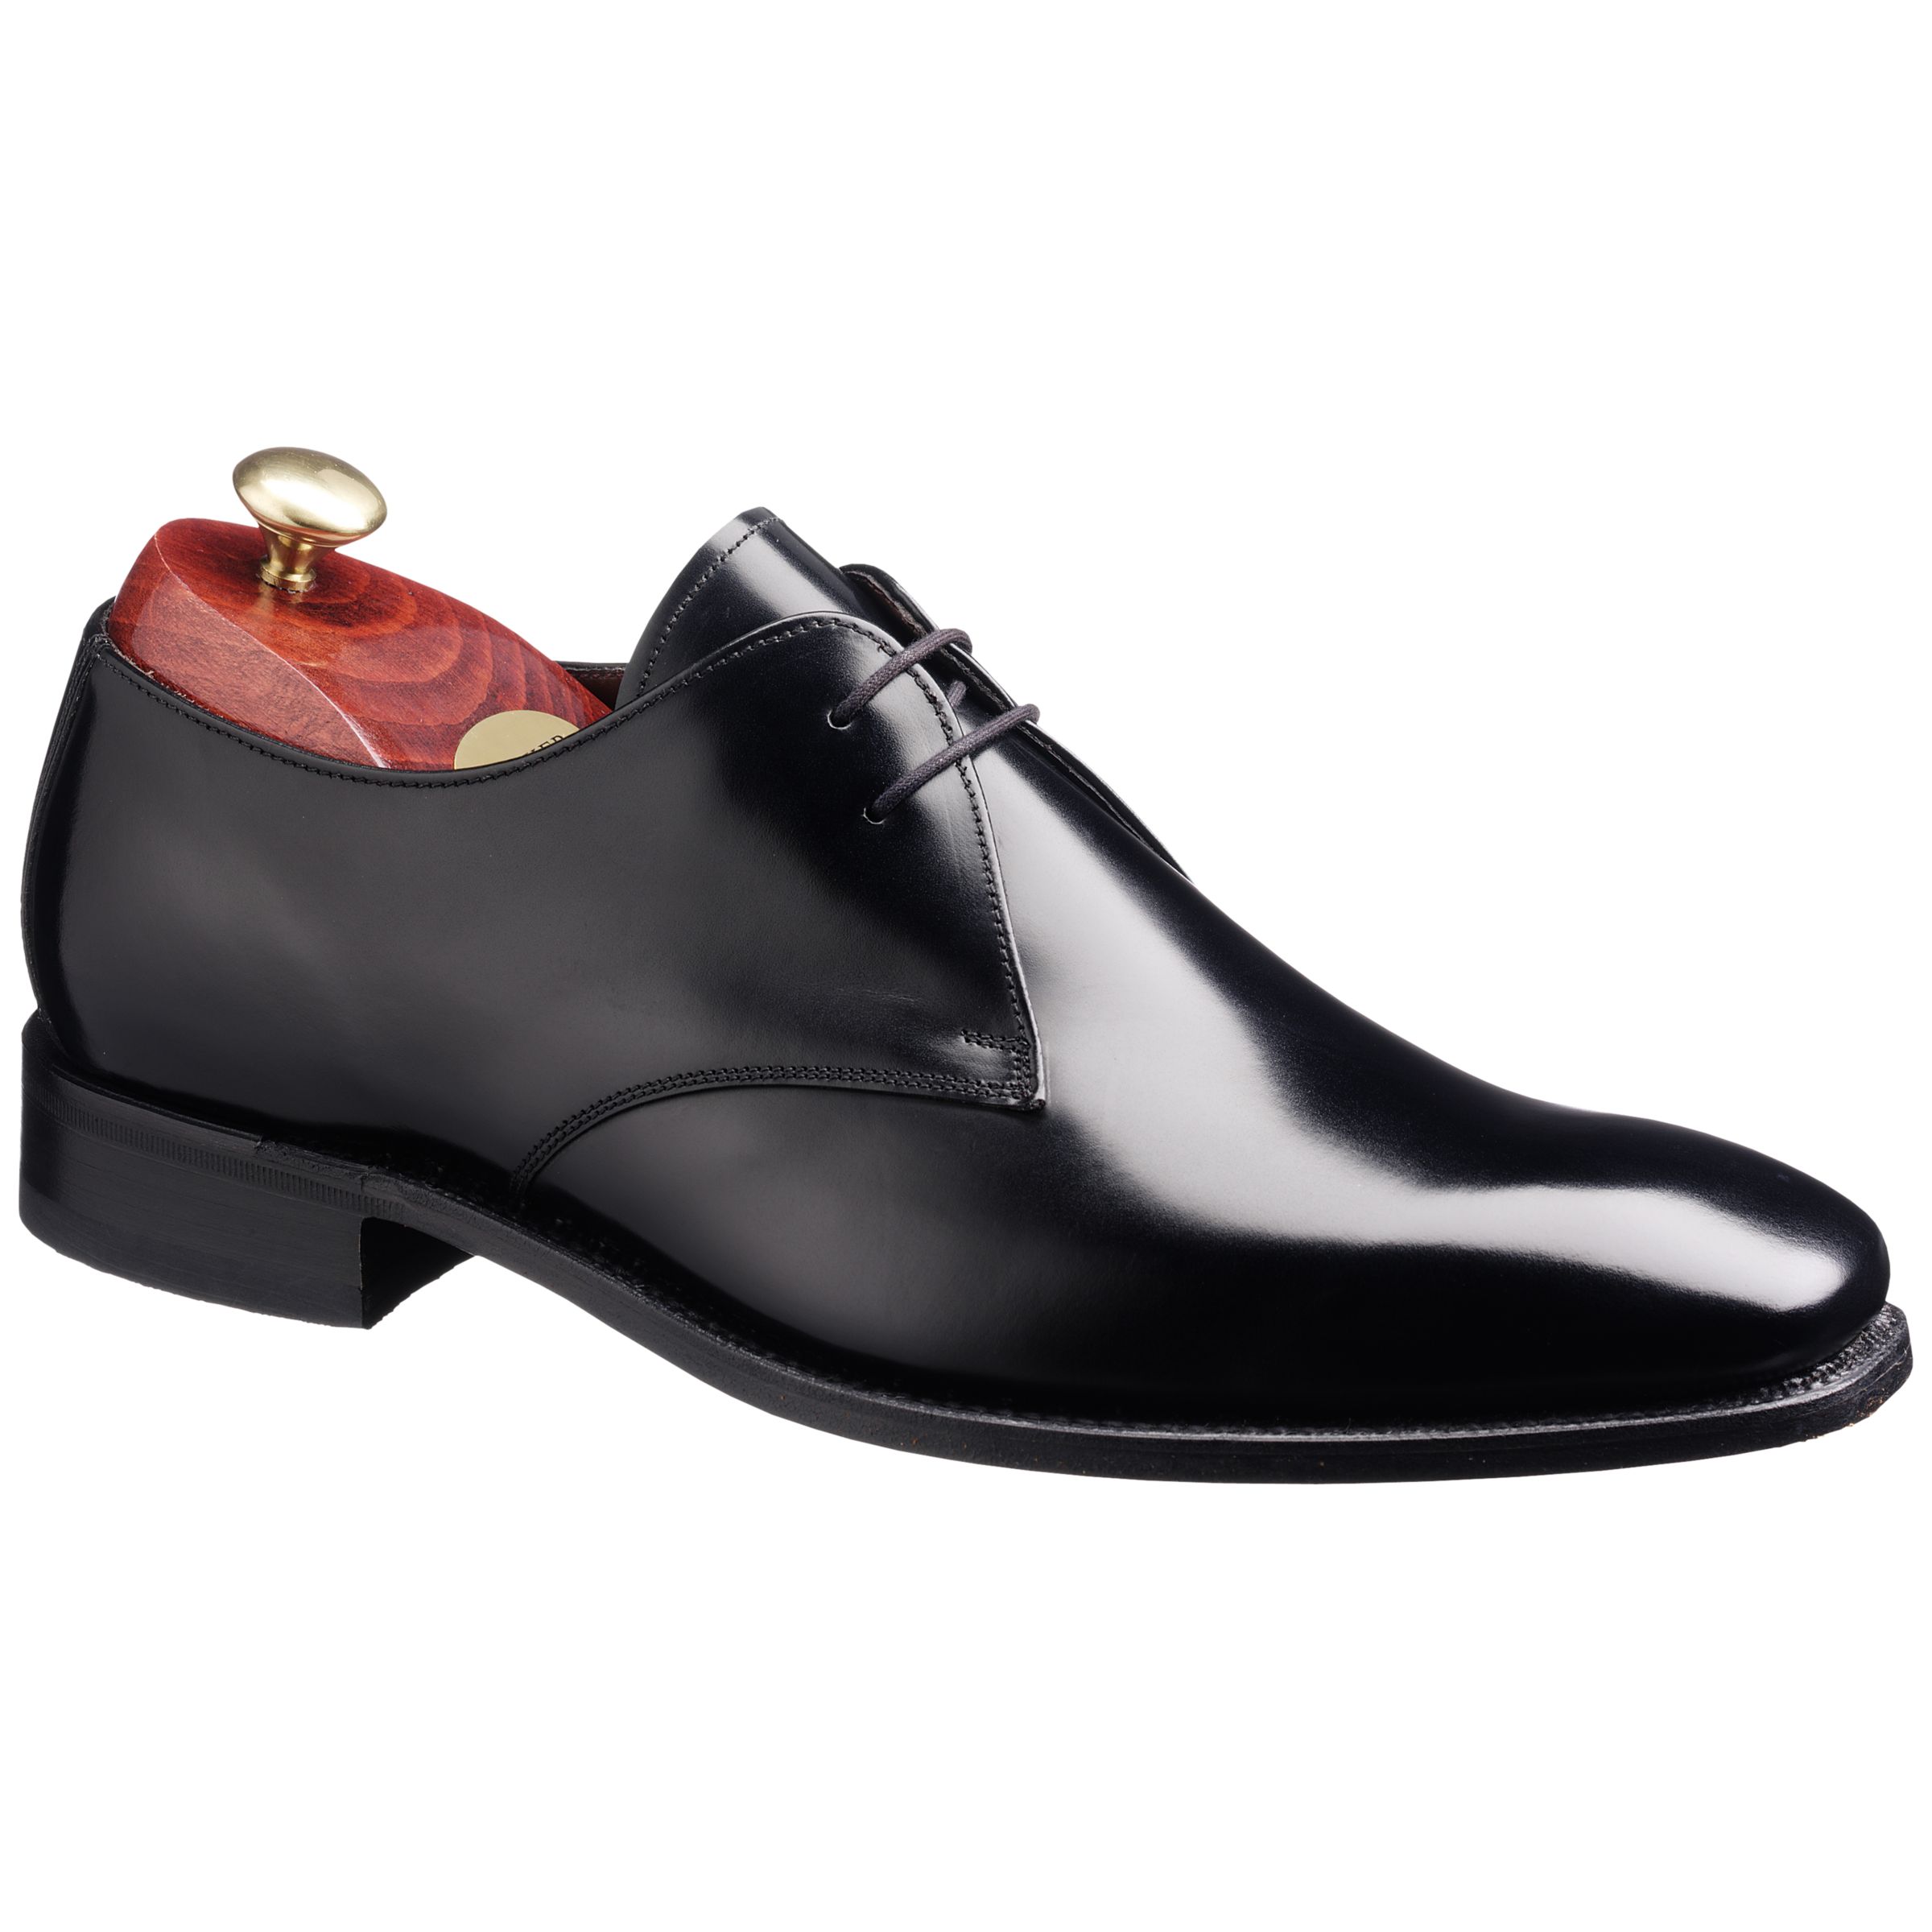 Barker Dwight Lace Up Shoes, Black at John Lewis